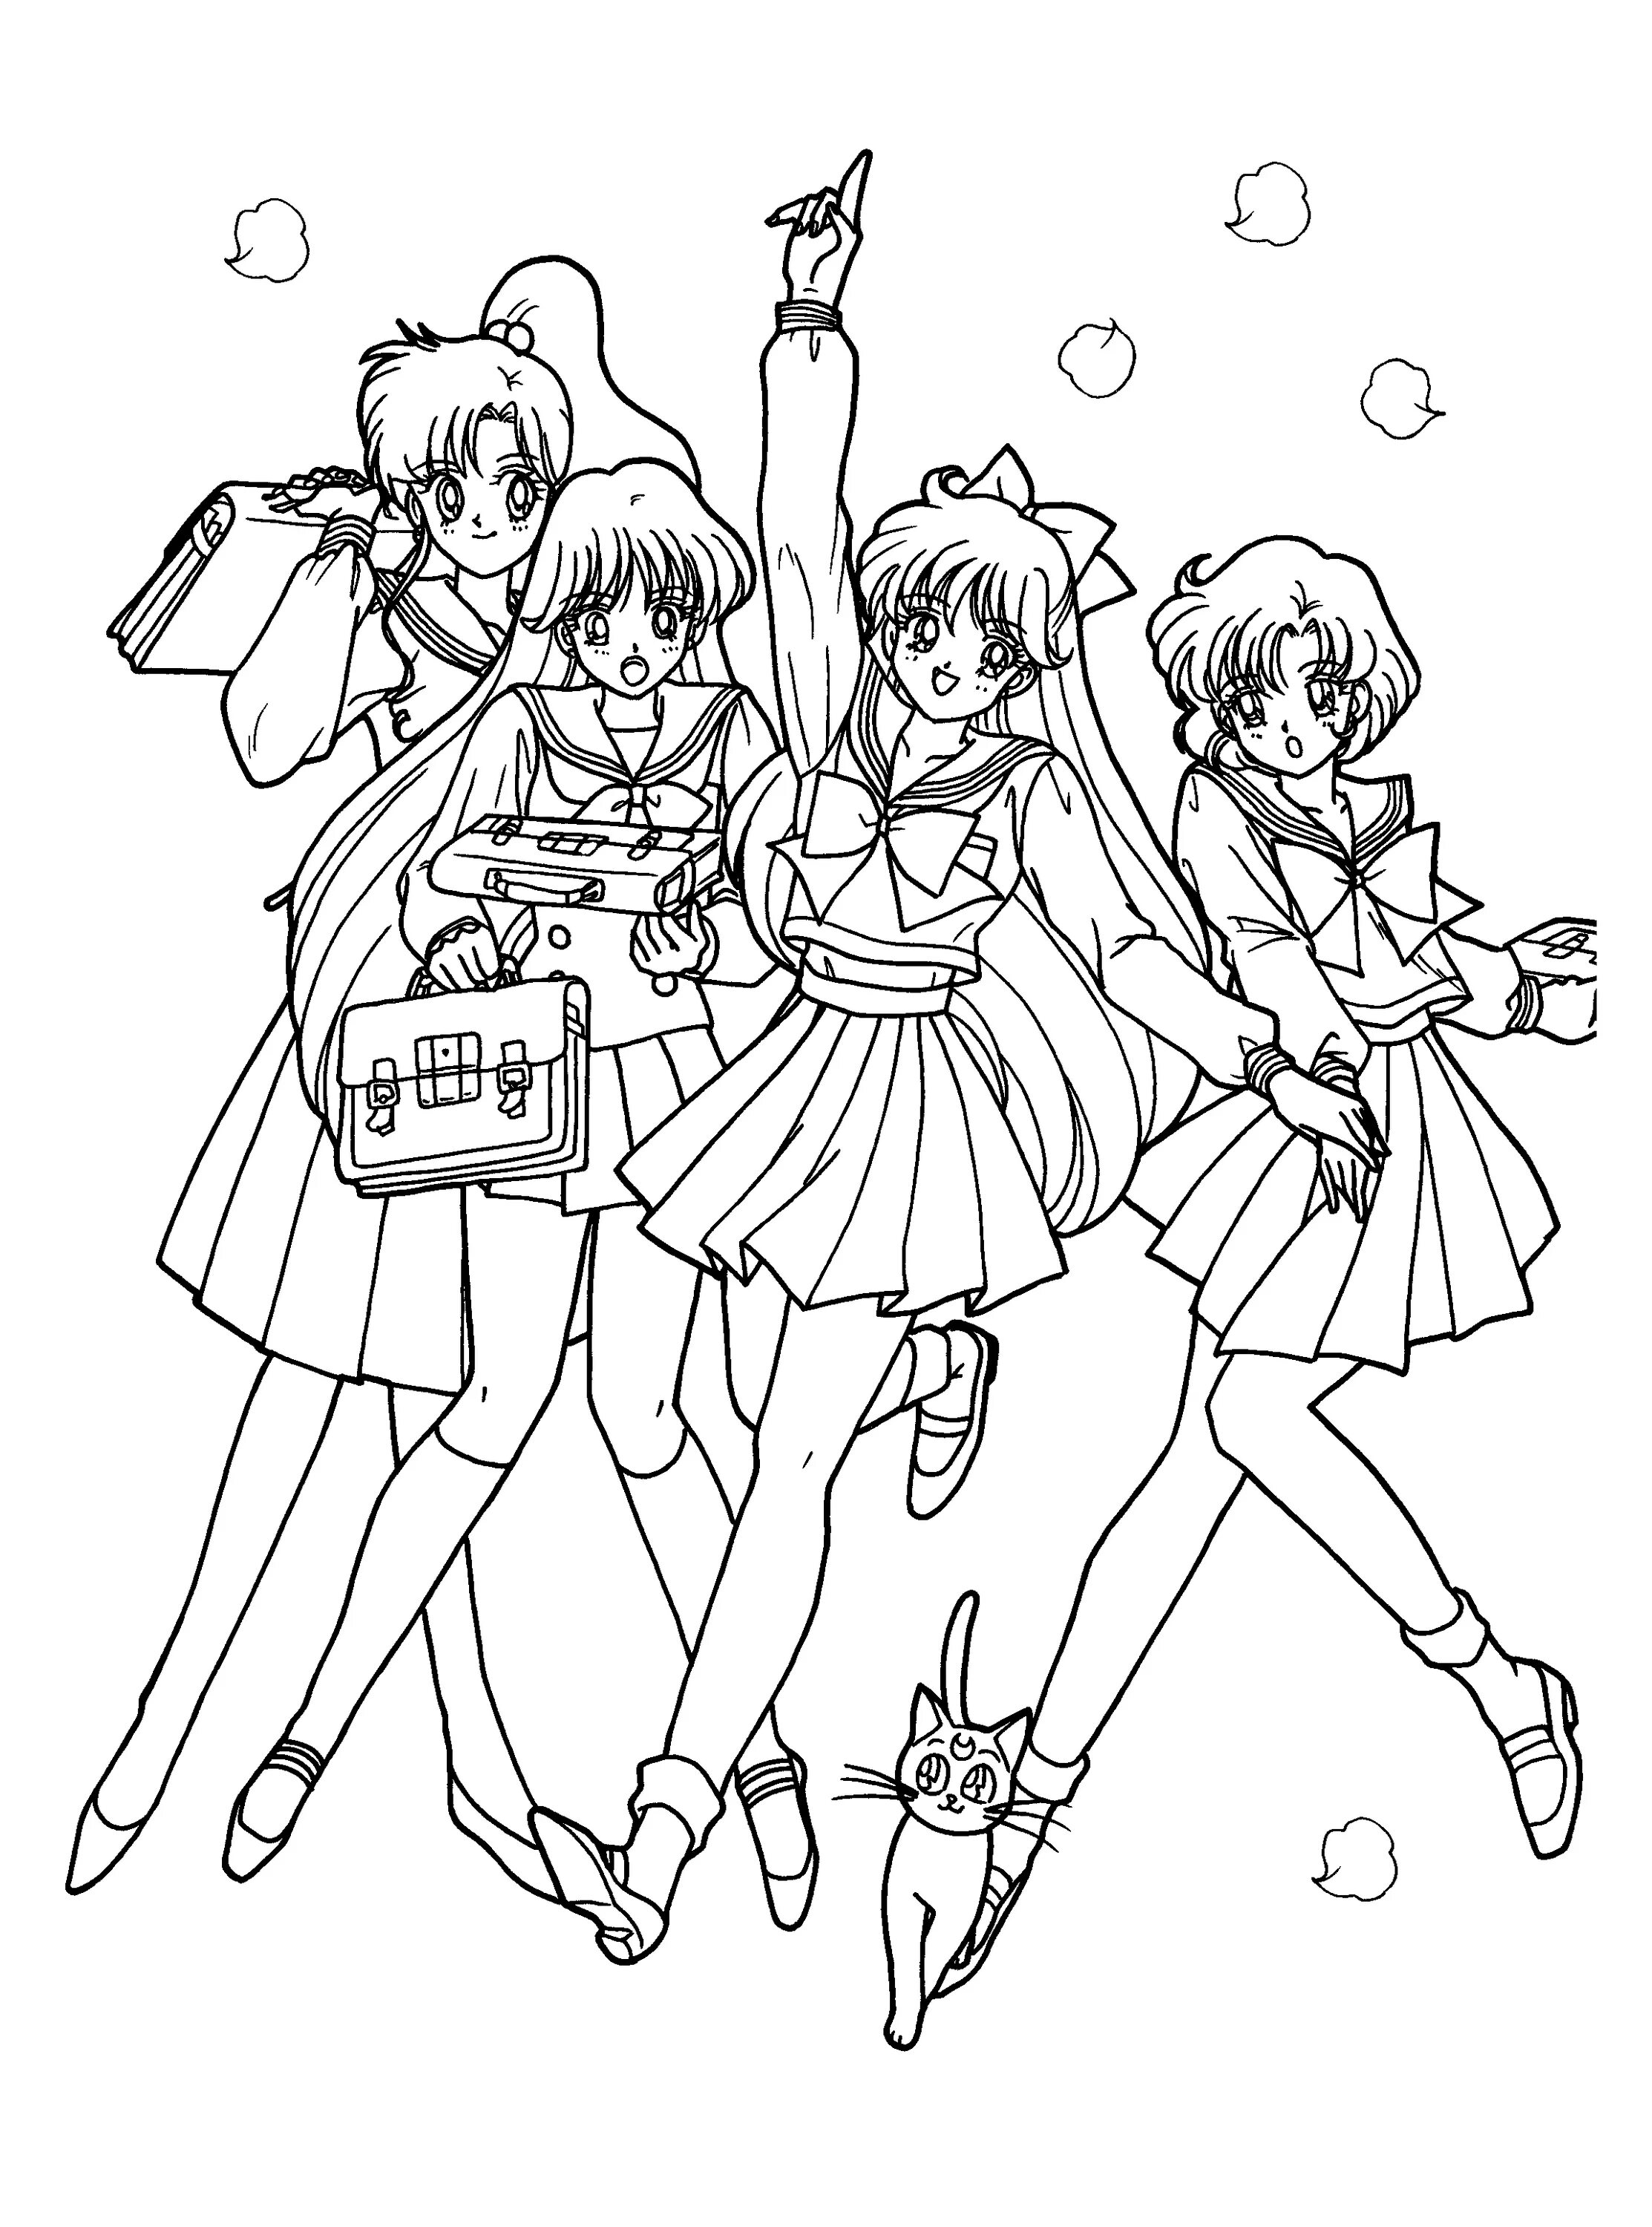 Inspirational coloring book for girls sailor moon